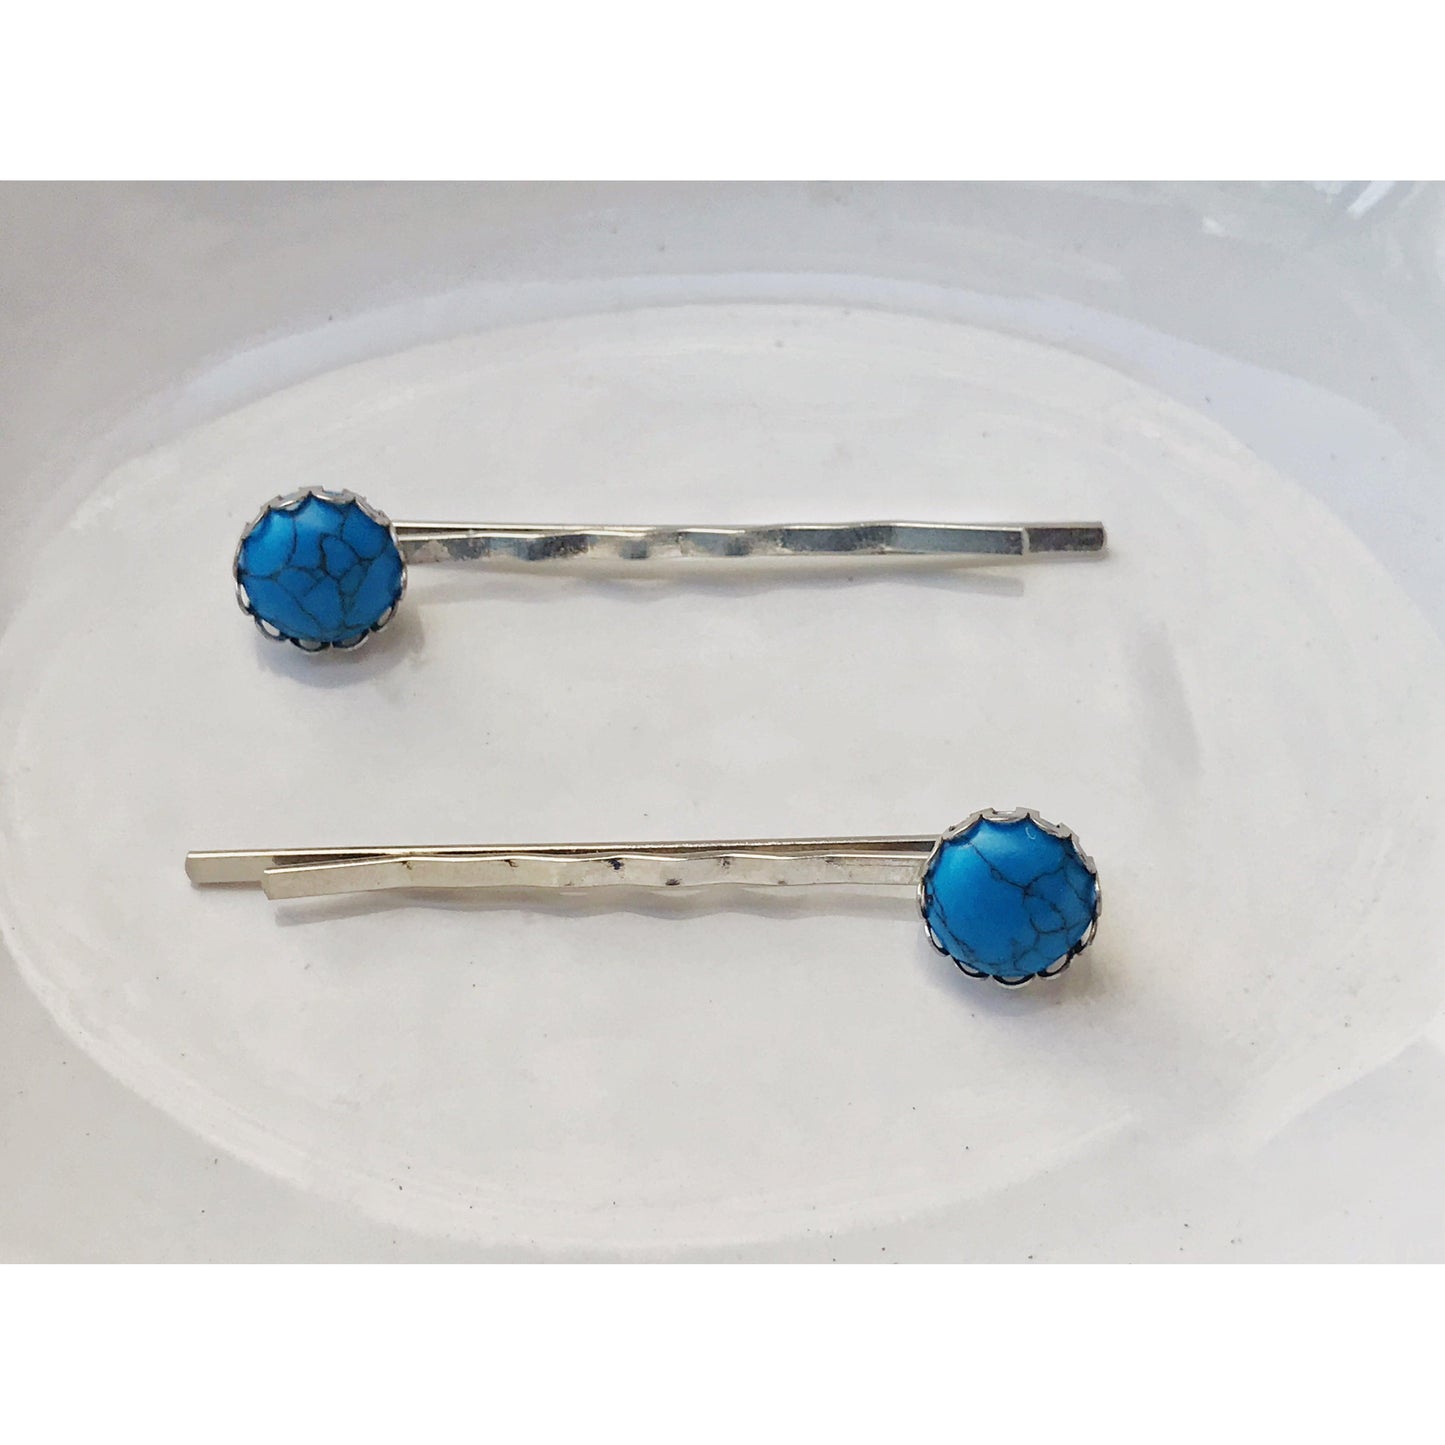 Turquoise Hair Pin - Western Cowgirl Decorative Bobby Pin, Women's Southwestern Hair Accessories